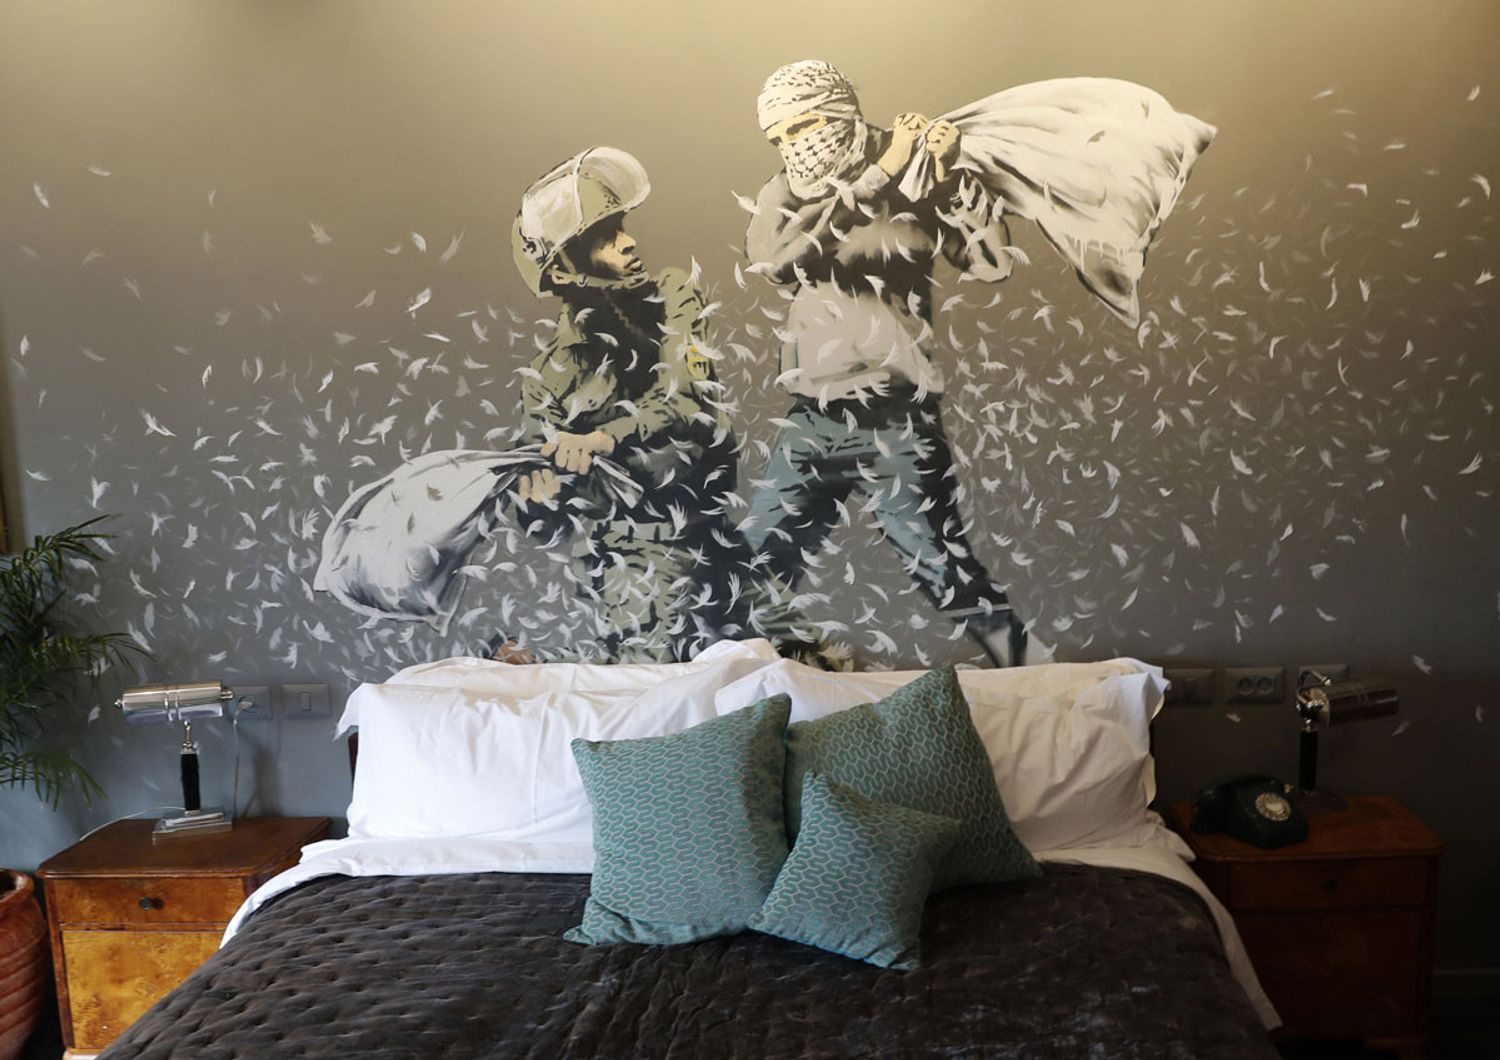 The Walled off Hotel / Banksy &nbsp;